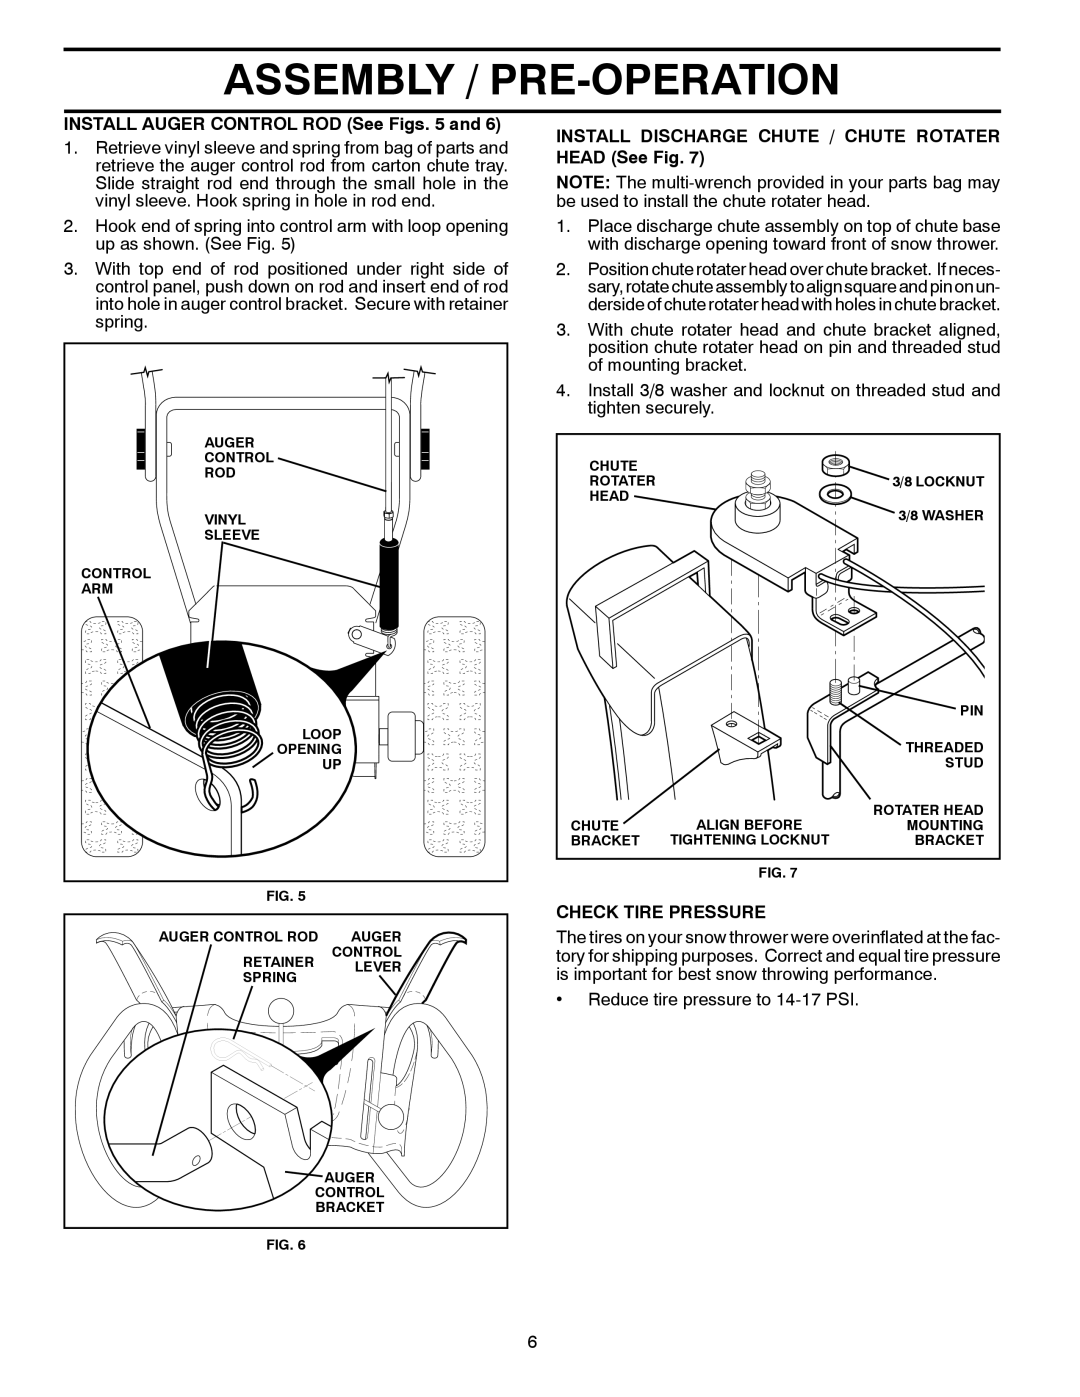 Poulan 428863, 96192003400 Assembly / Pre-Operation, INSTALL AUGER CONTROL ROD See Figs. 5 and, Check Tire Pressure 